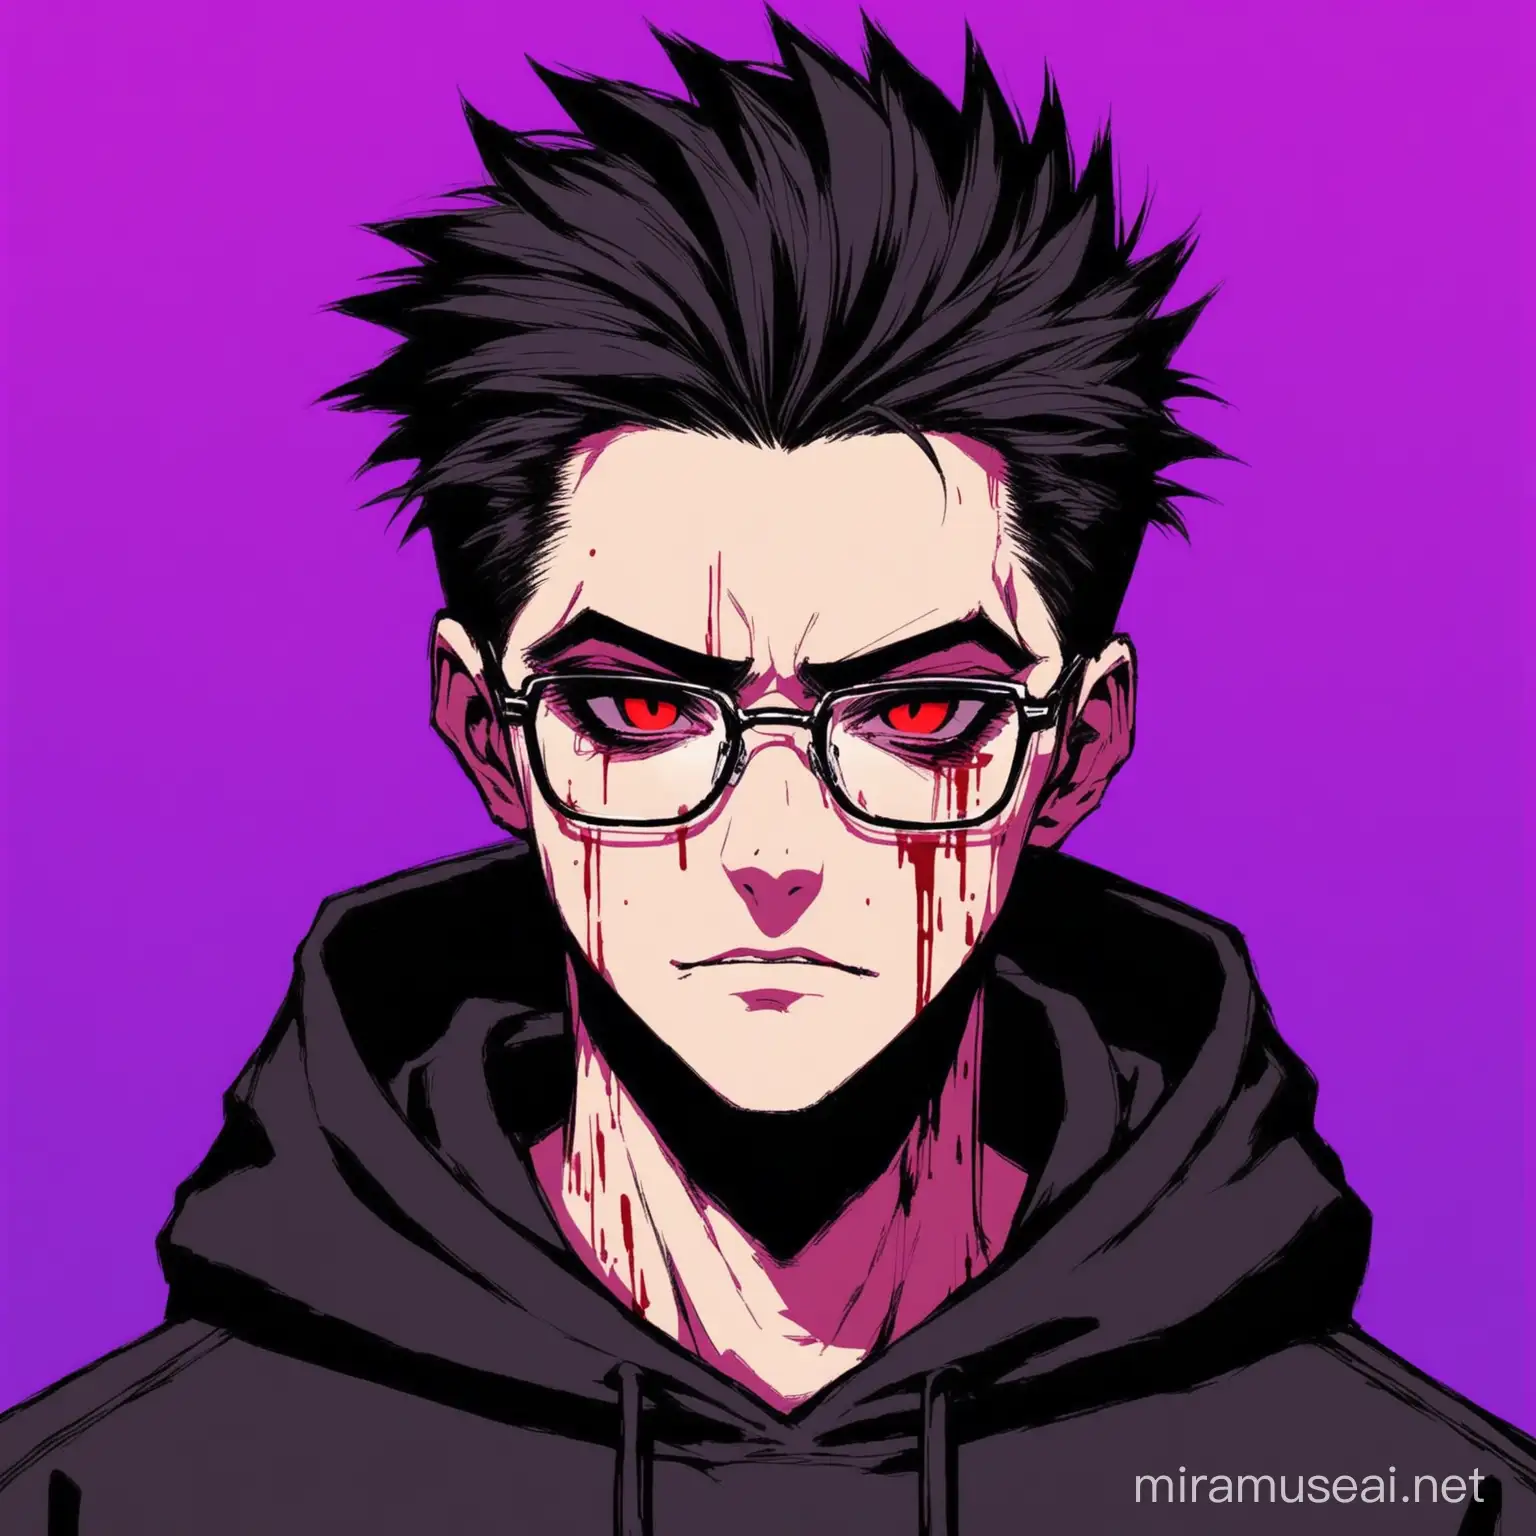 Stylish Hacker with Quiff Hair and Red Eyes on Purple BloodStained Background